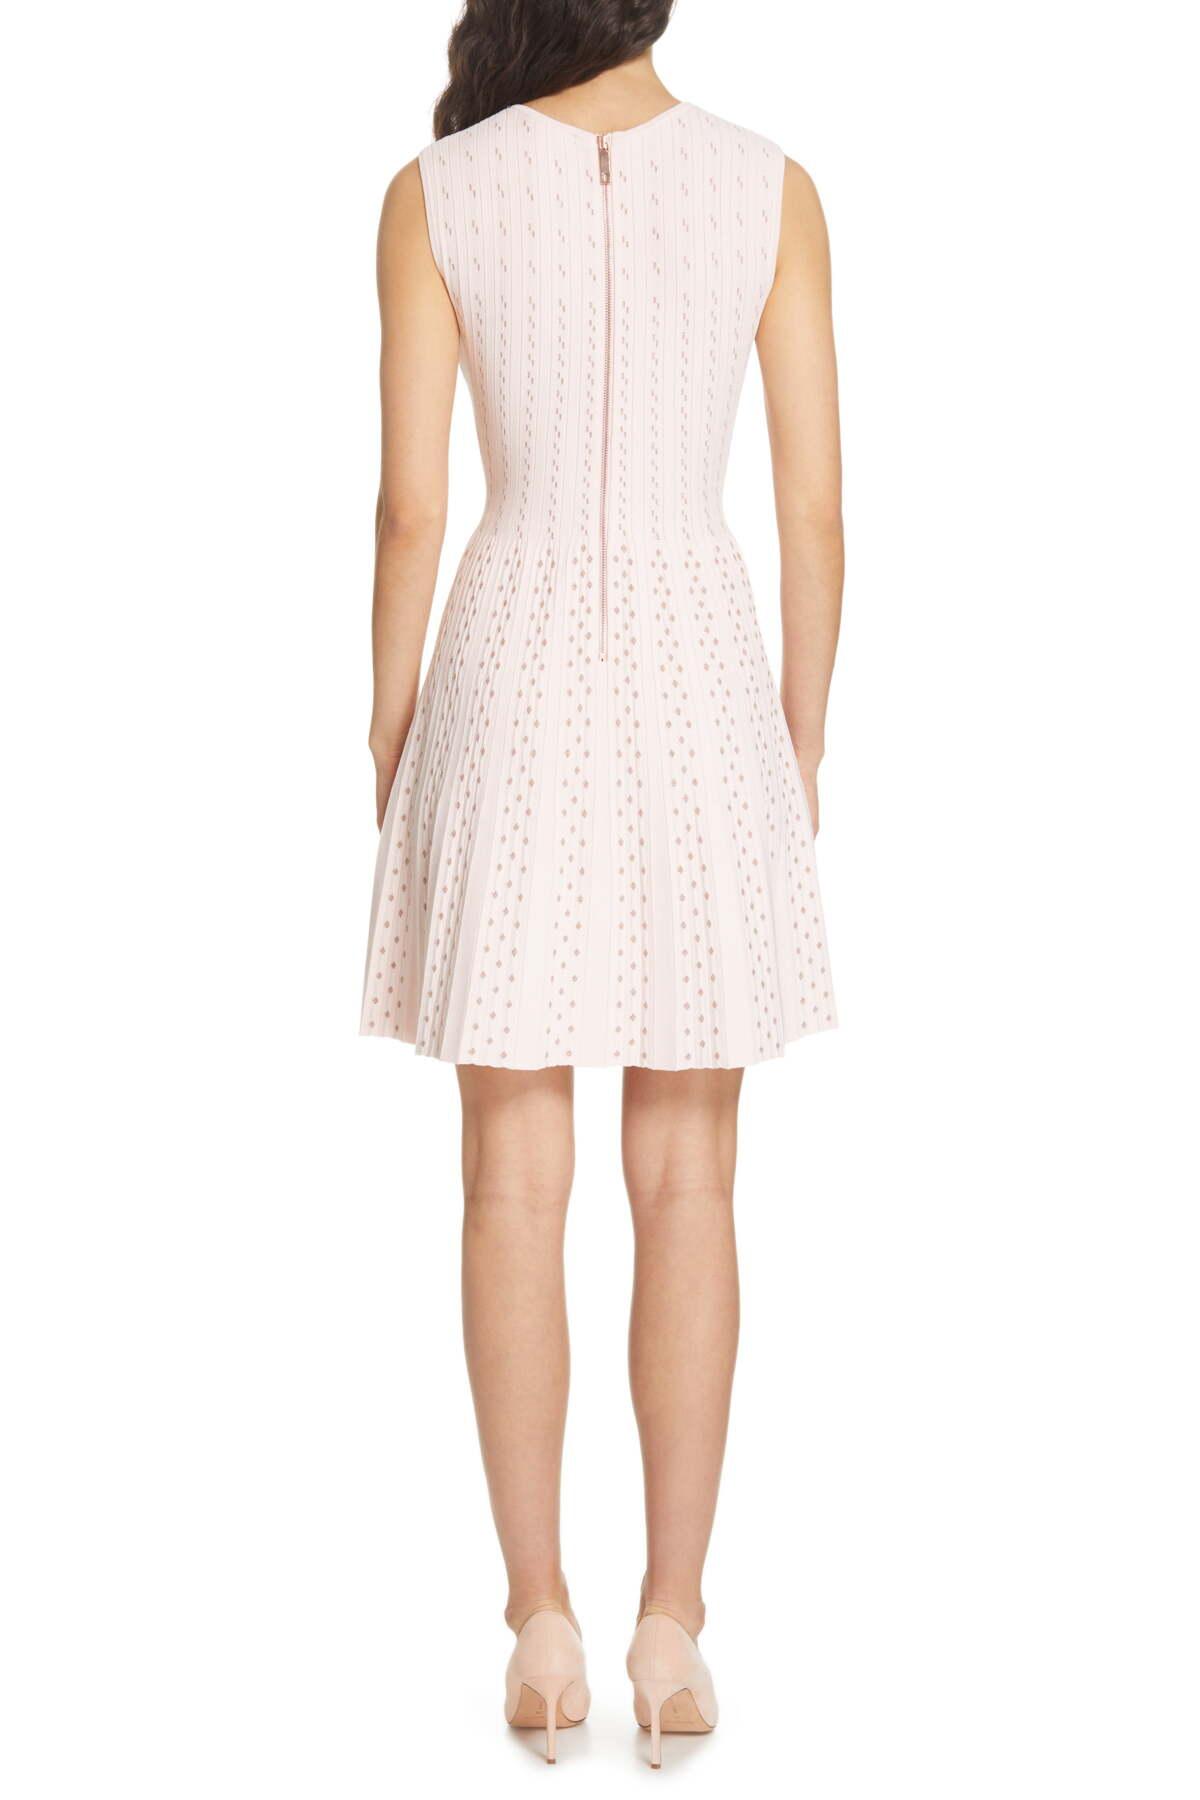 Ted Baker Synthetic Knitted Flippy Skater Dress in Pale Pink (Pink) - Lyst